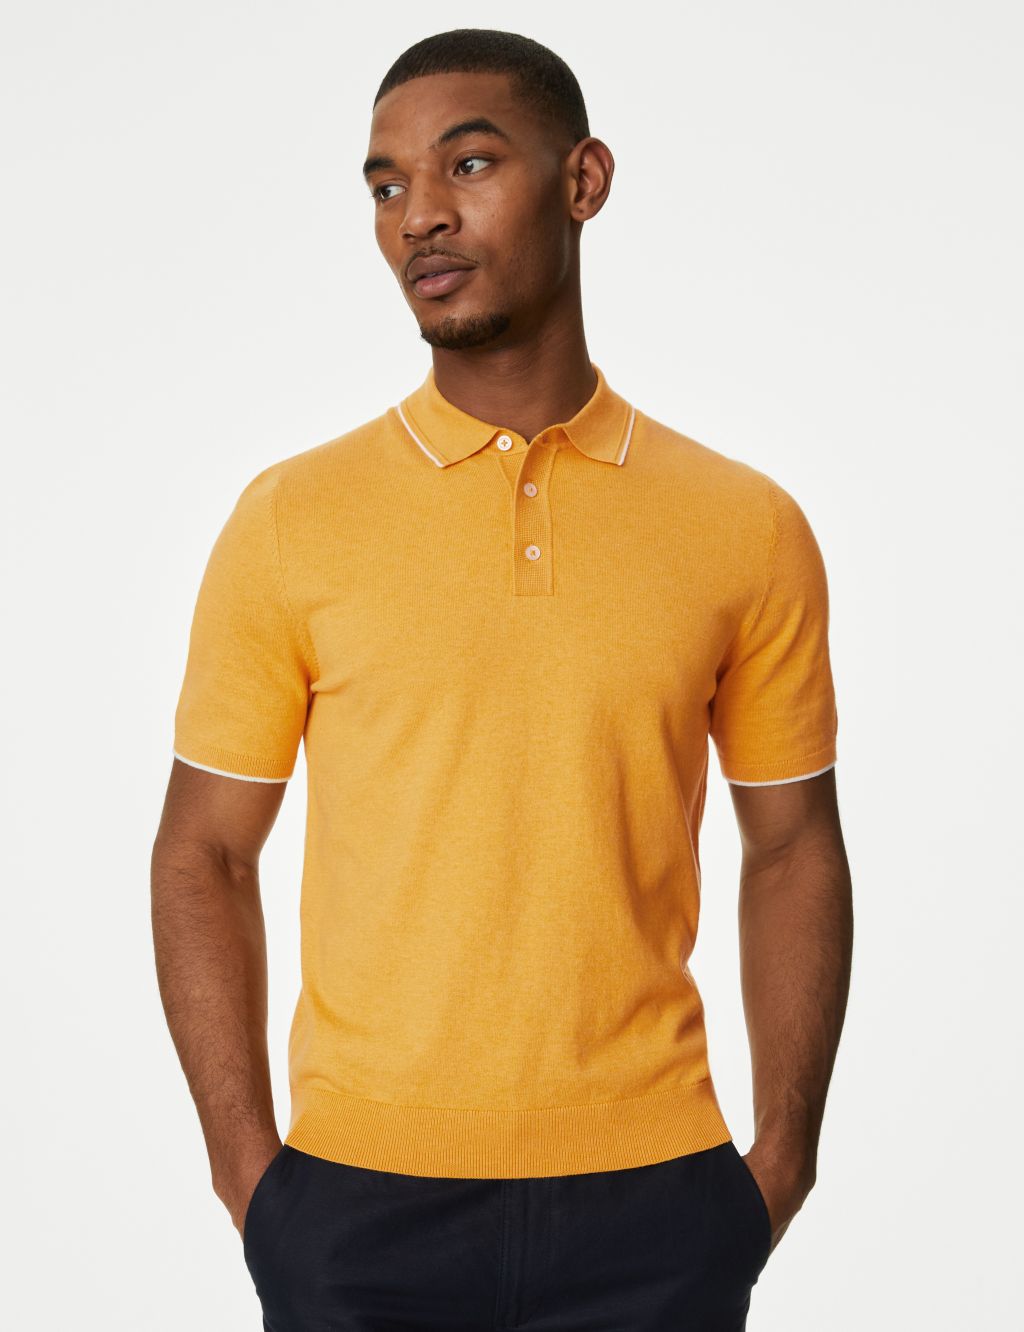 Page 2 - Men's Knitted Polo Shirts | M&S